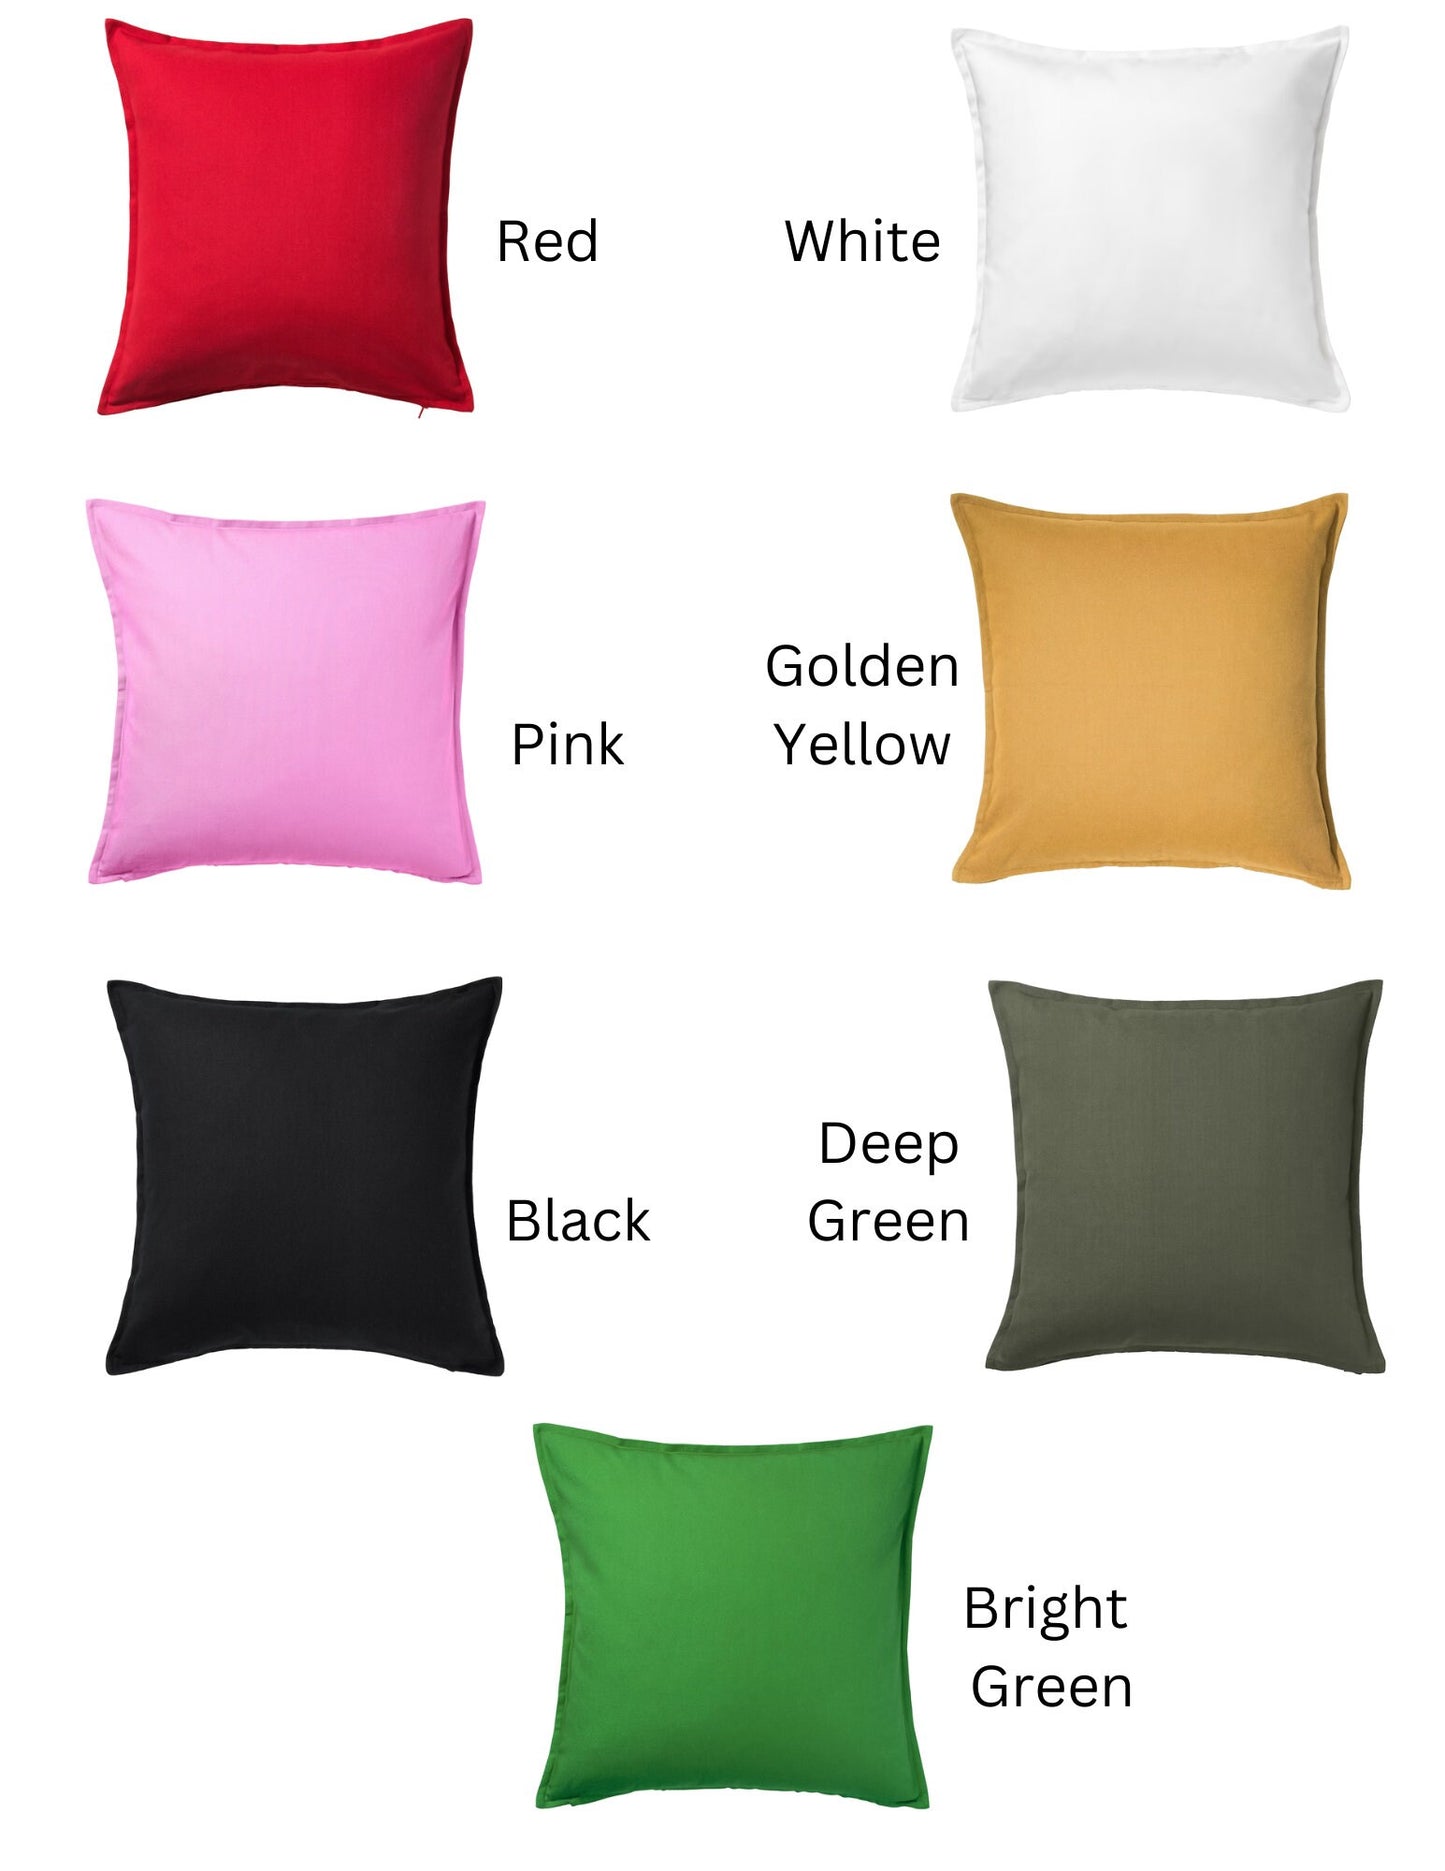 Customizable 20"x20" Cotton Cushion Cover and optional Cotton Cushion with Duck Feather Filling